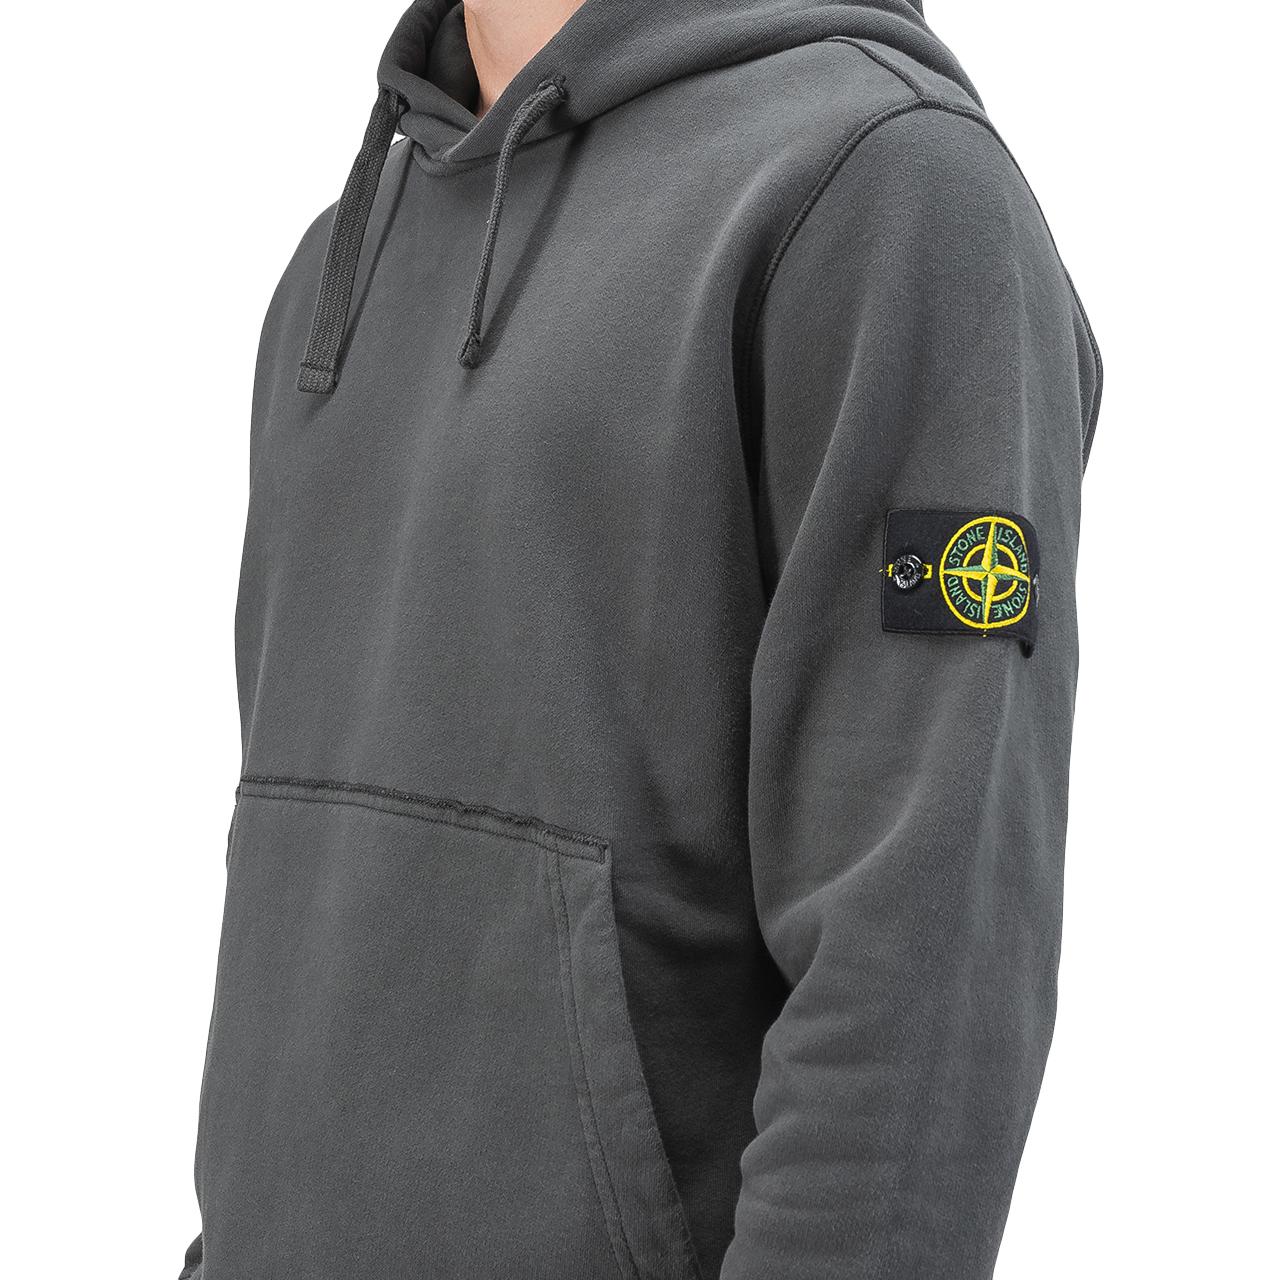 Stone Island Cotton Hoodie in Gray for Men - Lyst